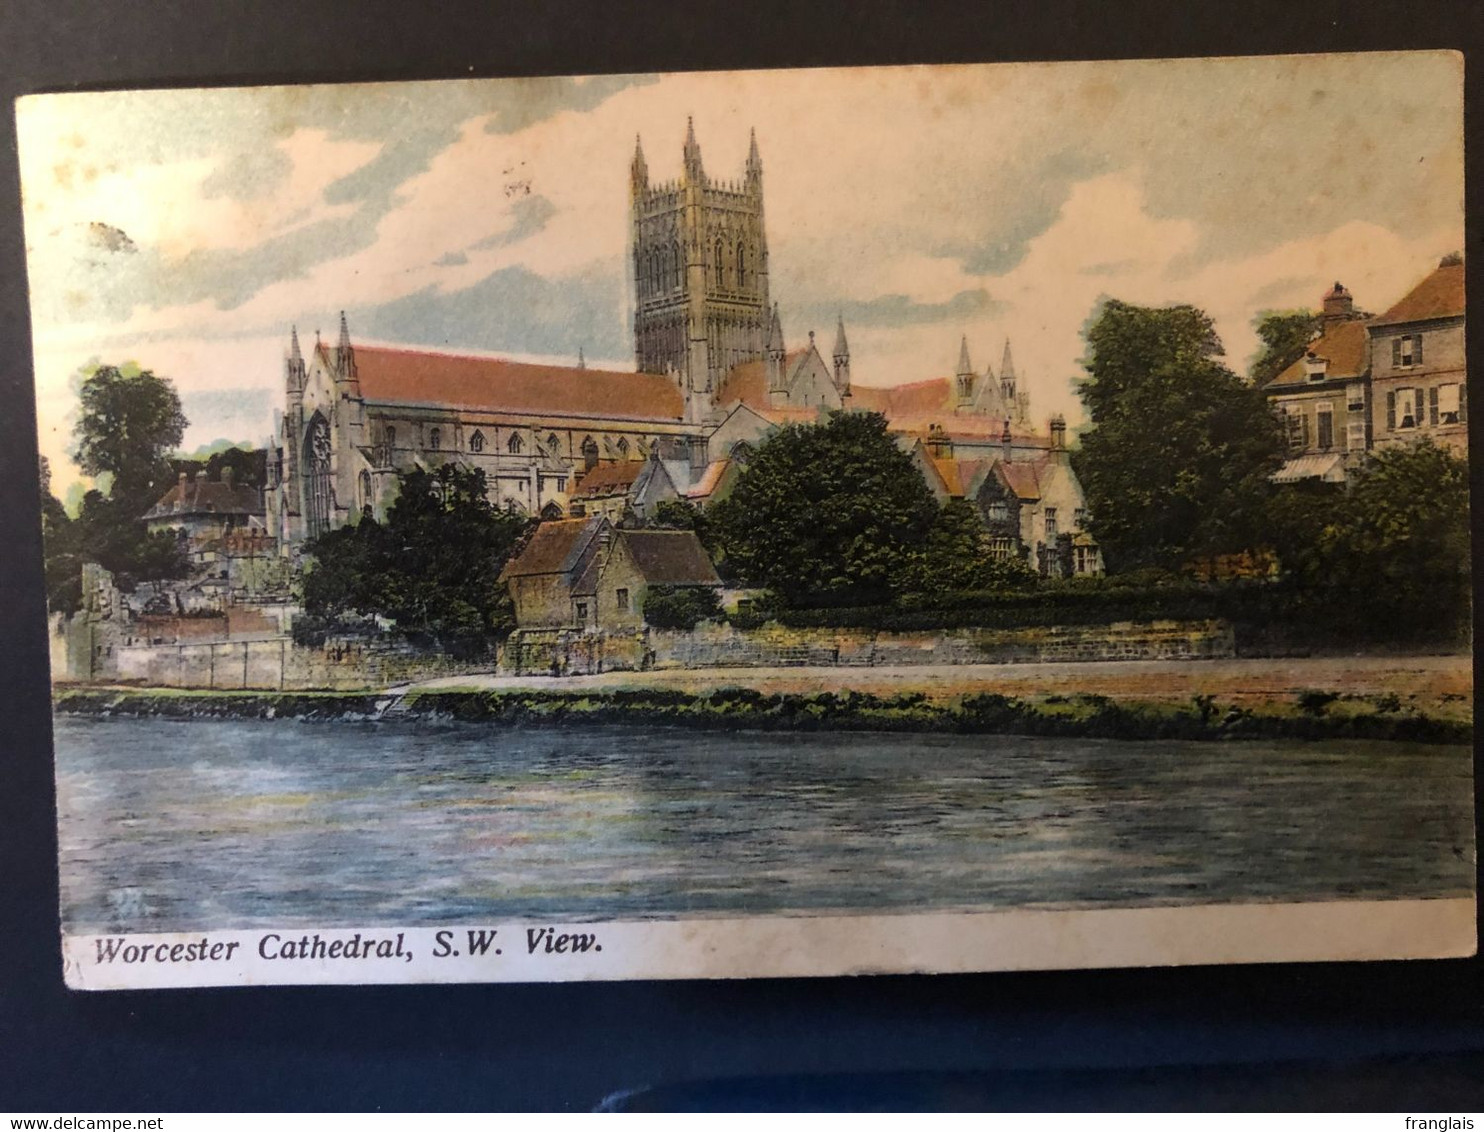 Worcester Cathedral, S.W. View, 1905 - Worcester